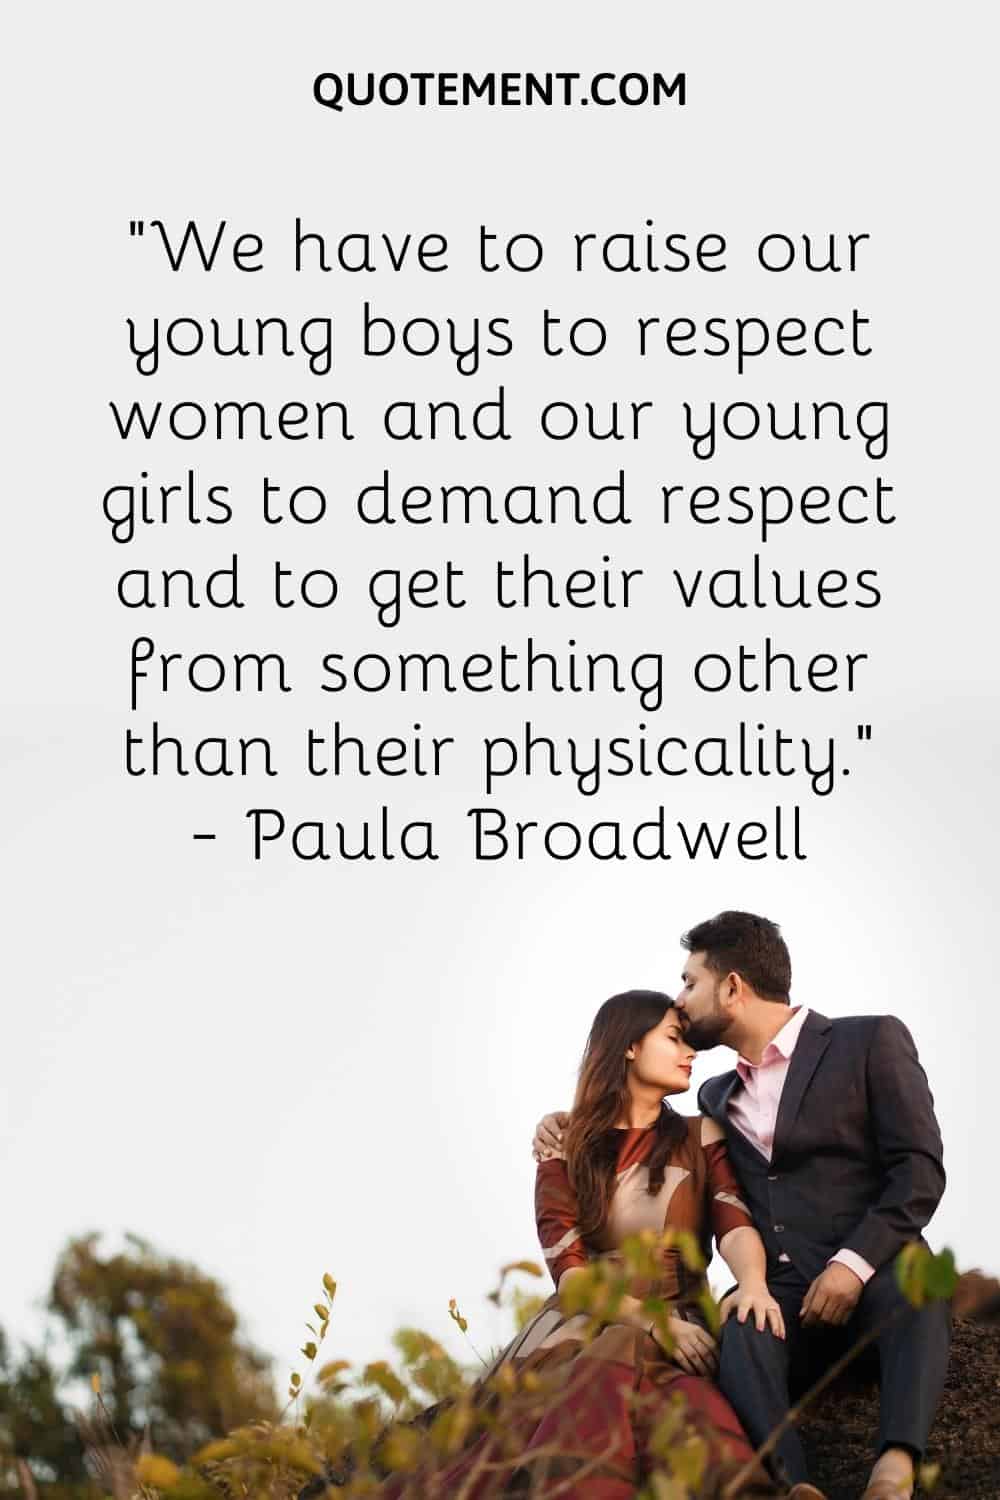 We have to raise our young boys to respect women